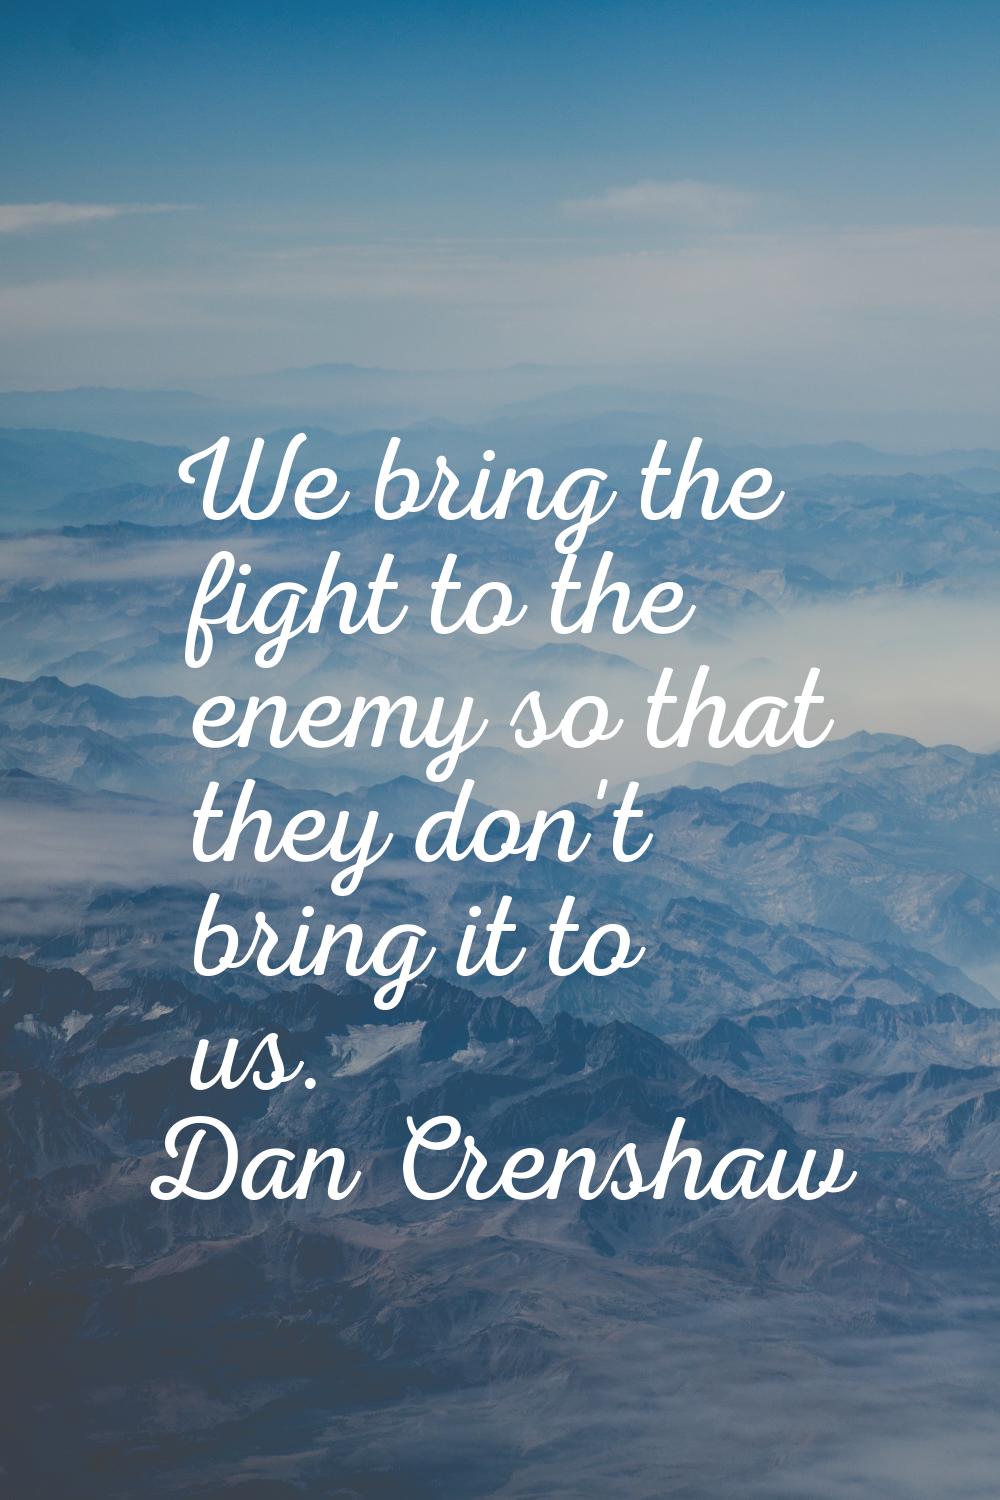 We bring the fight to the enemy so that they don't bring it to us.